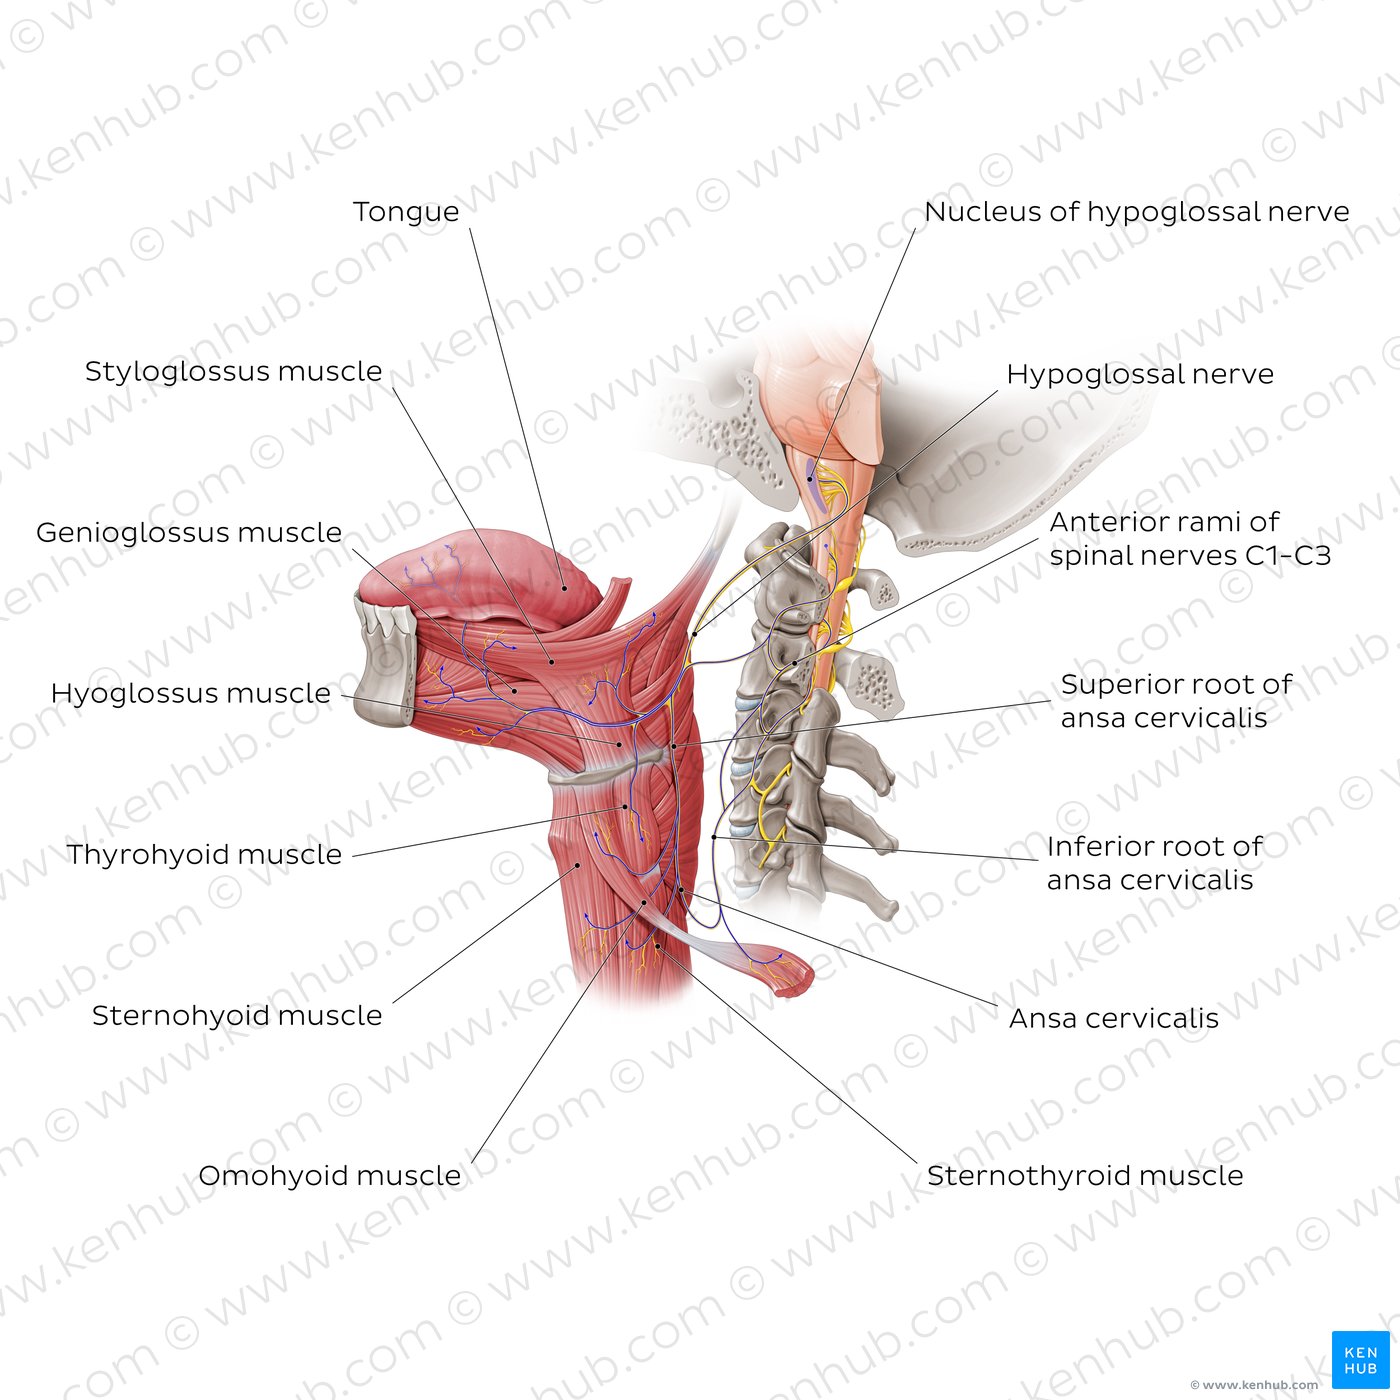 Overview of the hypoglossal nerve